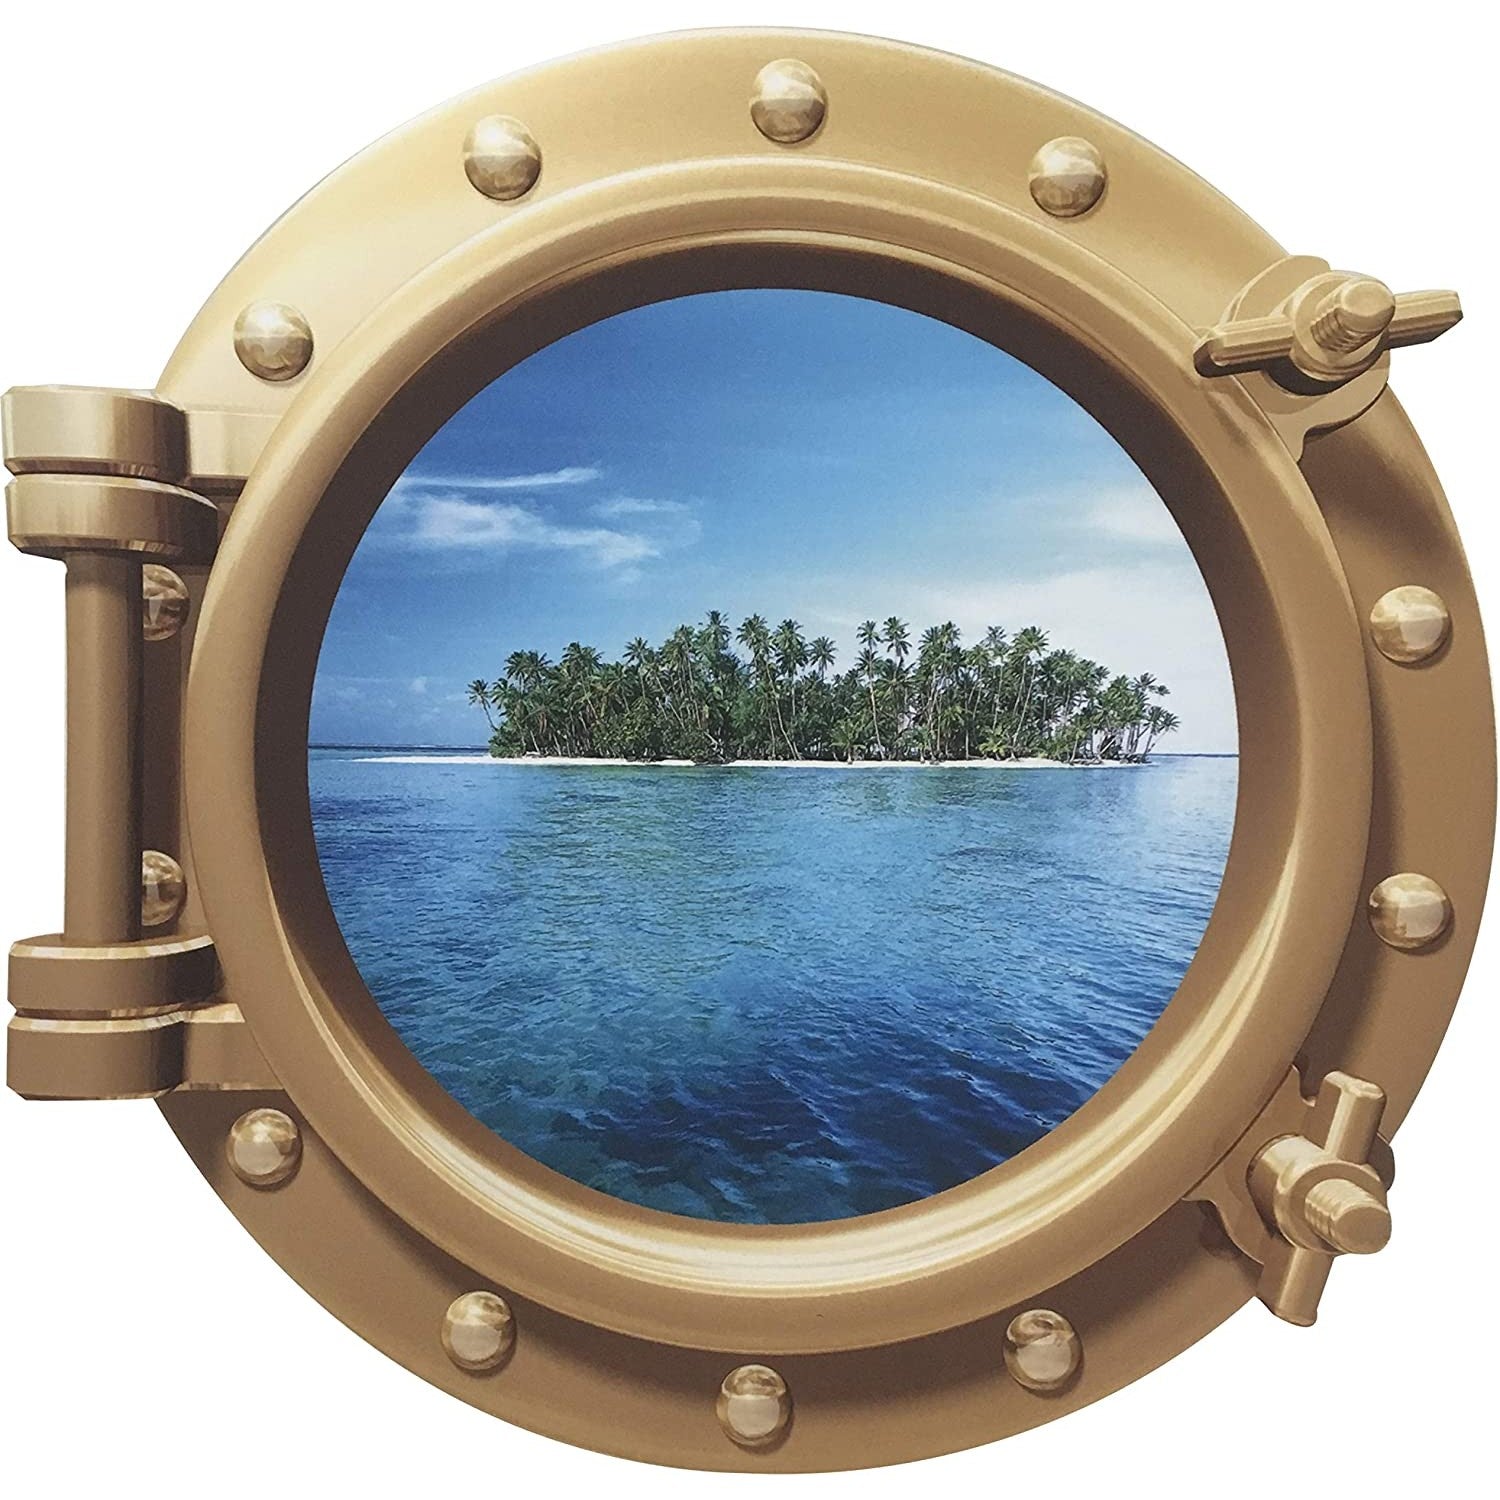 This wall decal makes it look like you have a cruise ship porthole in the room looking out towards a tropical island in the distance. 